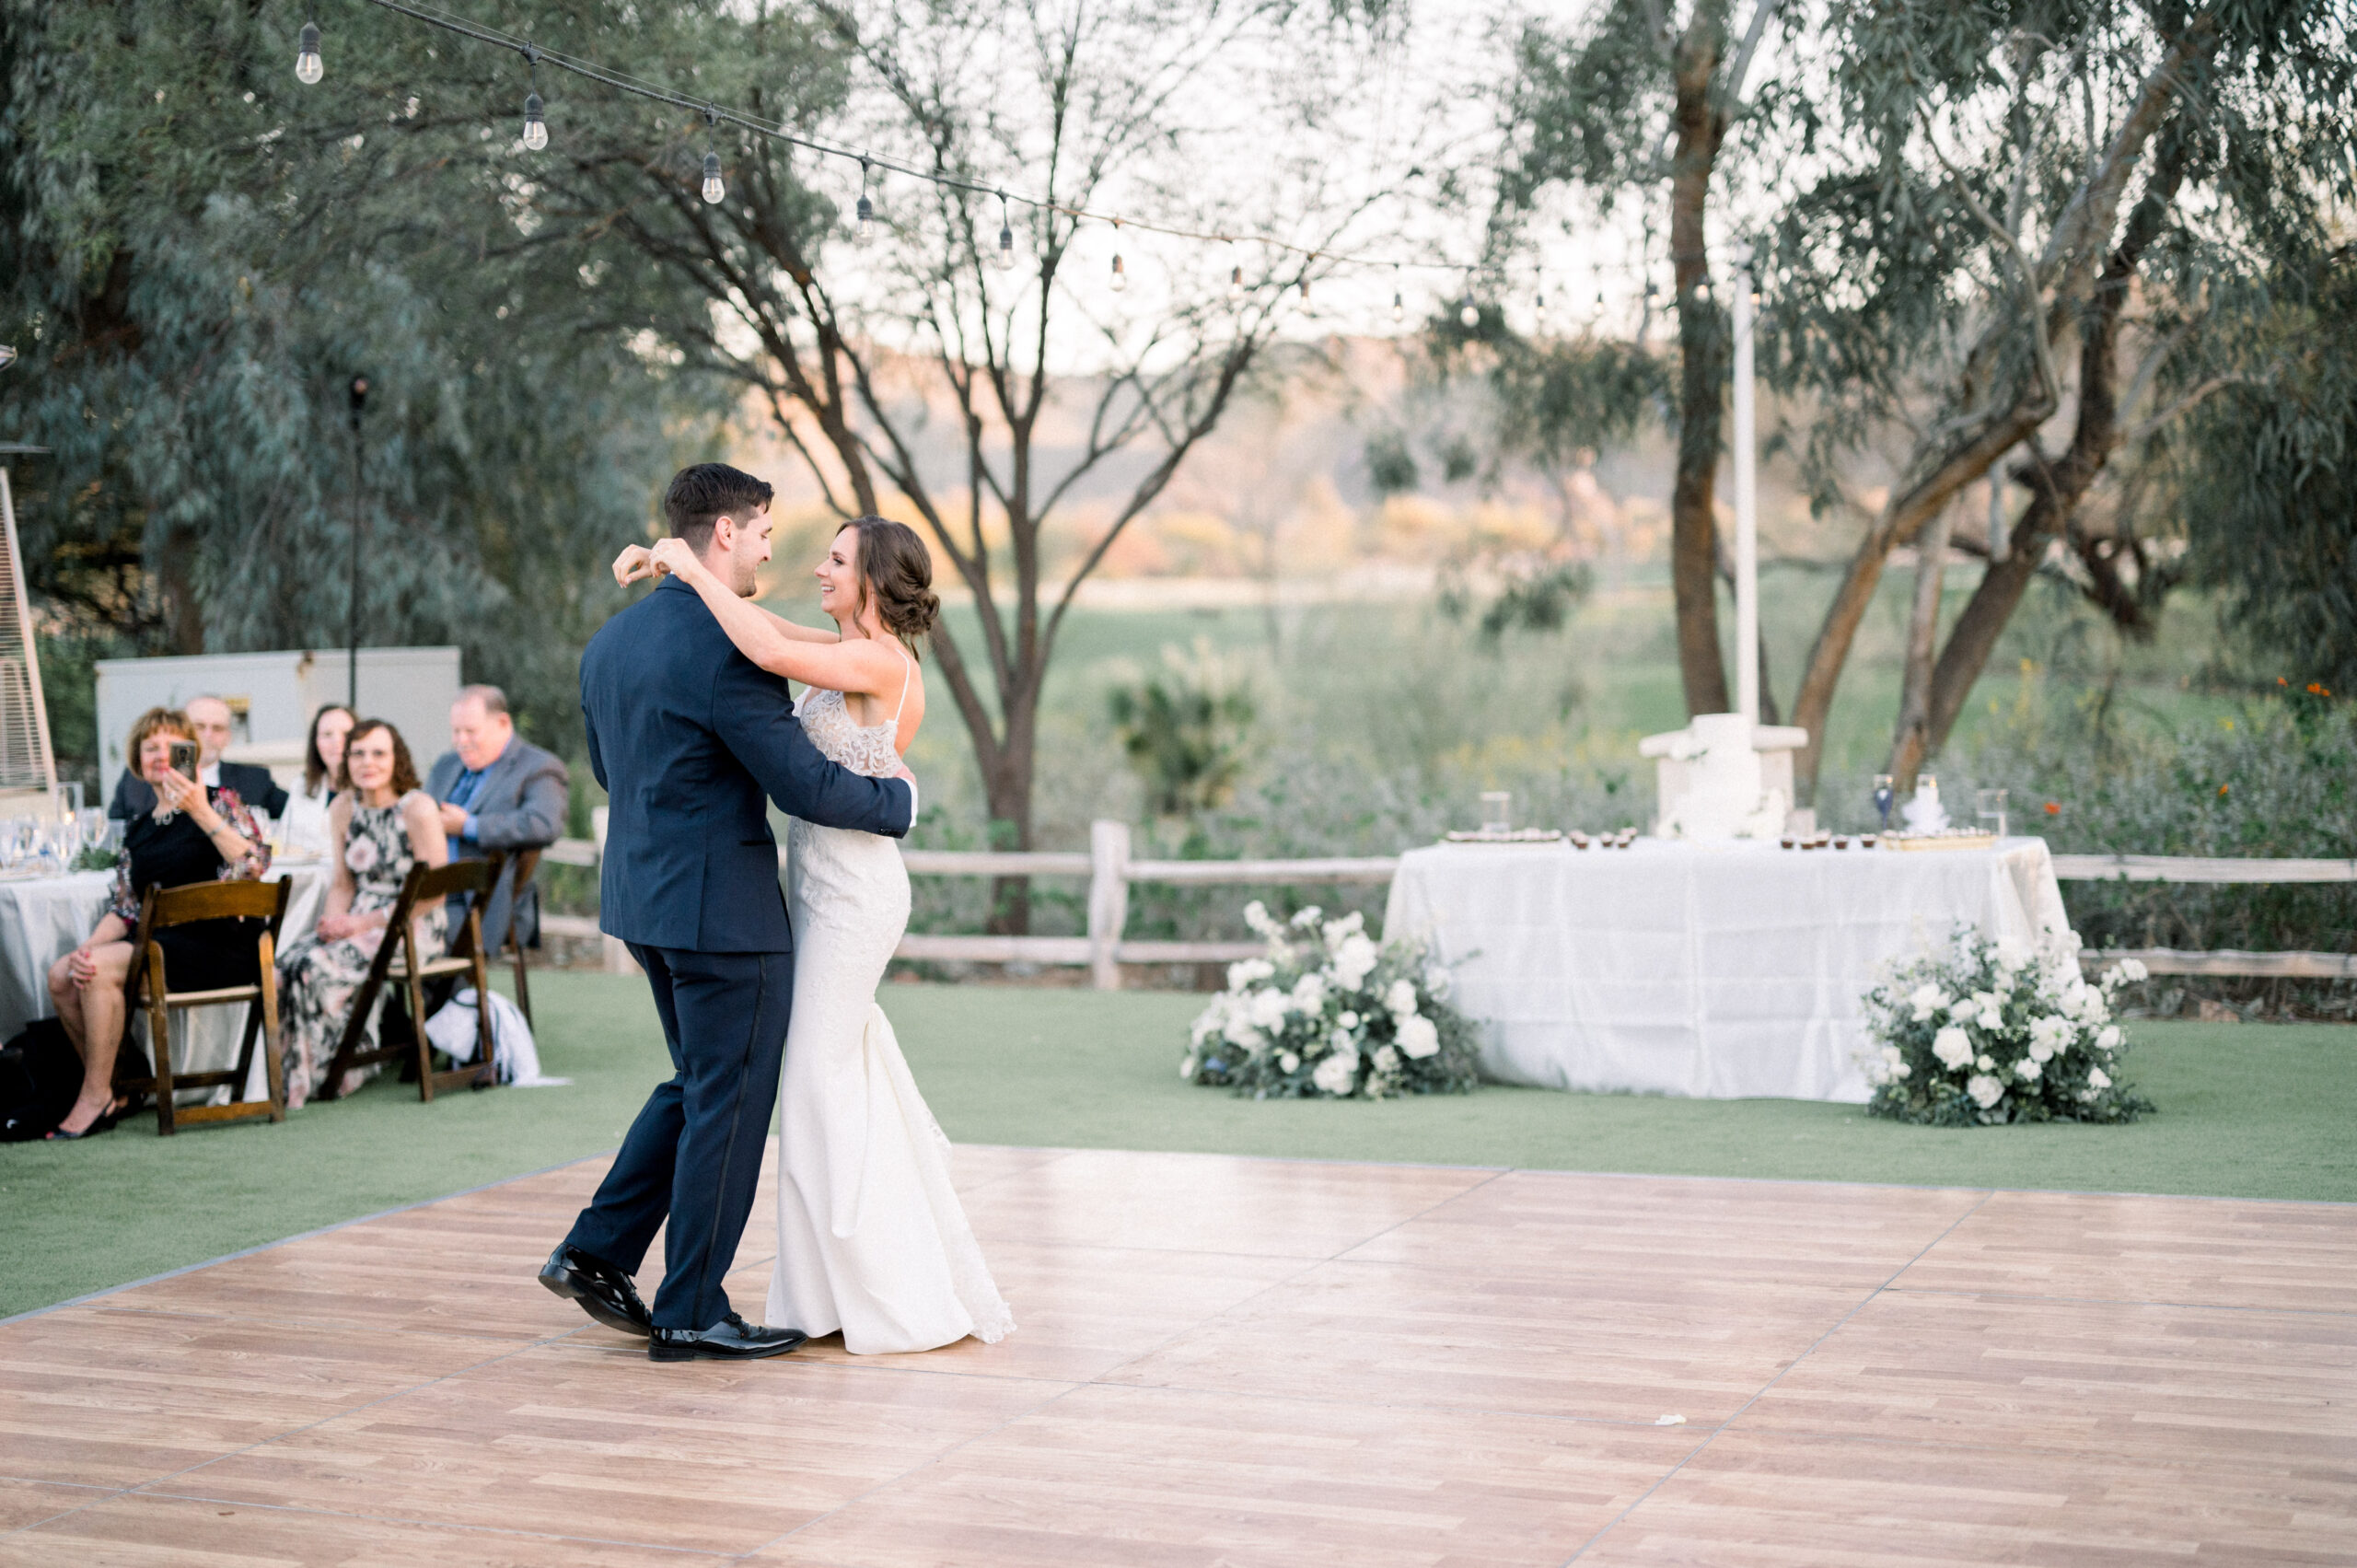 This beautiful spring day was perfect for an elegant Legacy Golf Resort Wedding. With Bridget and Mitch flying in from out of state to celebrate!